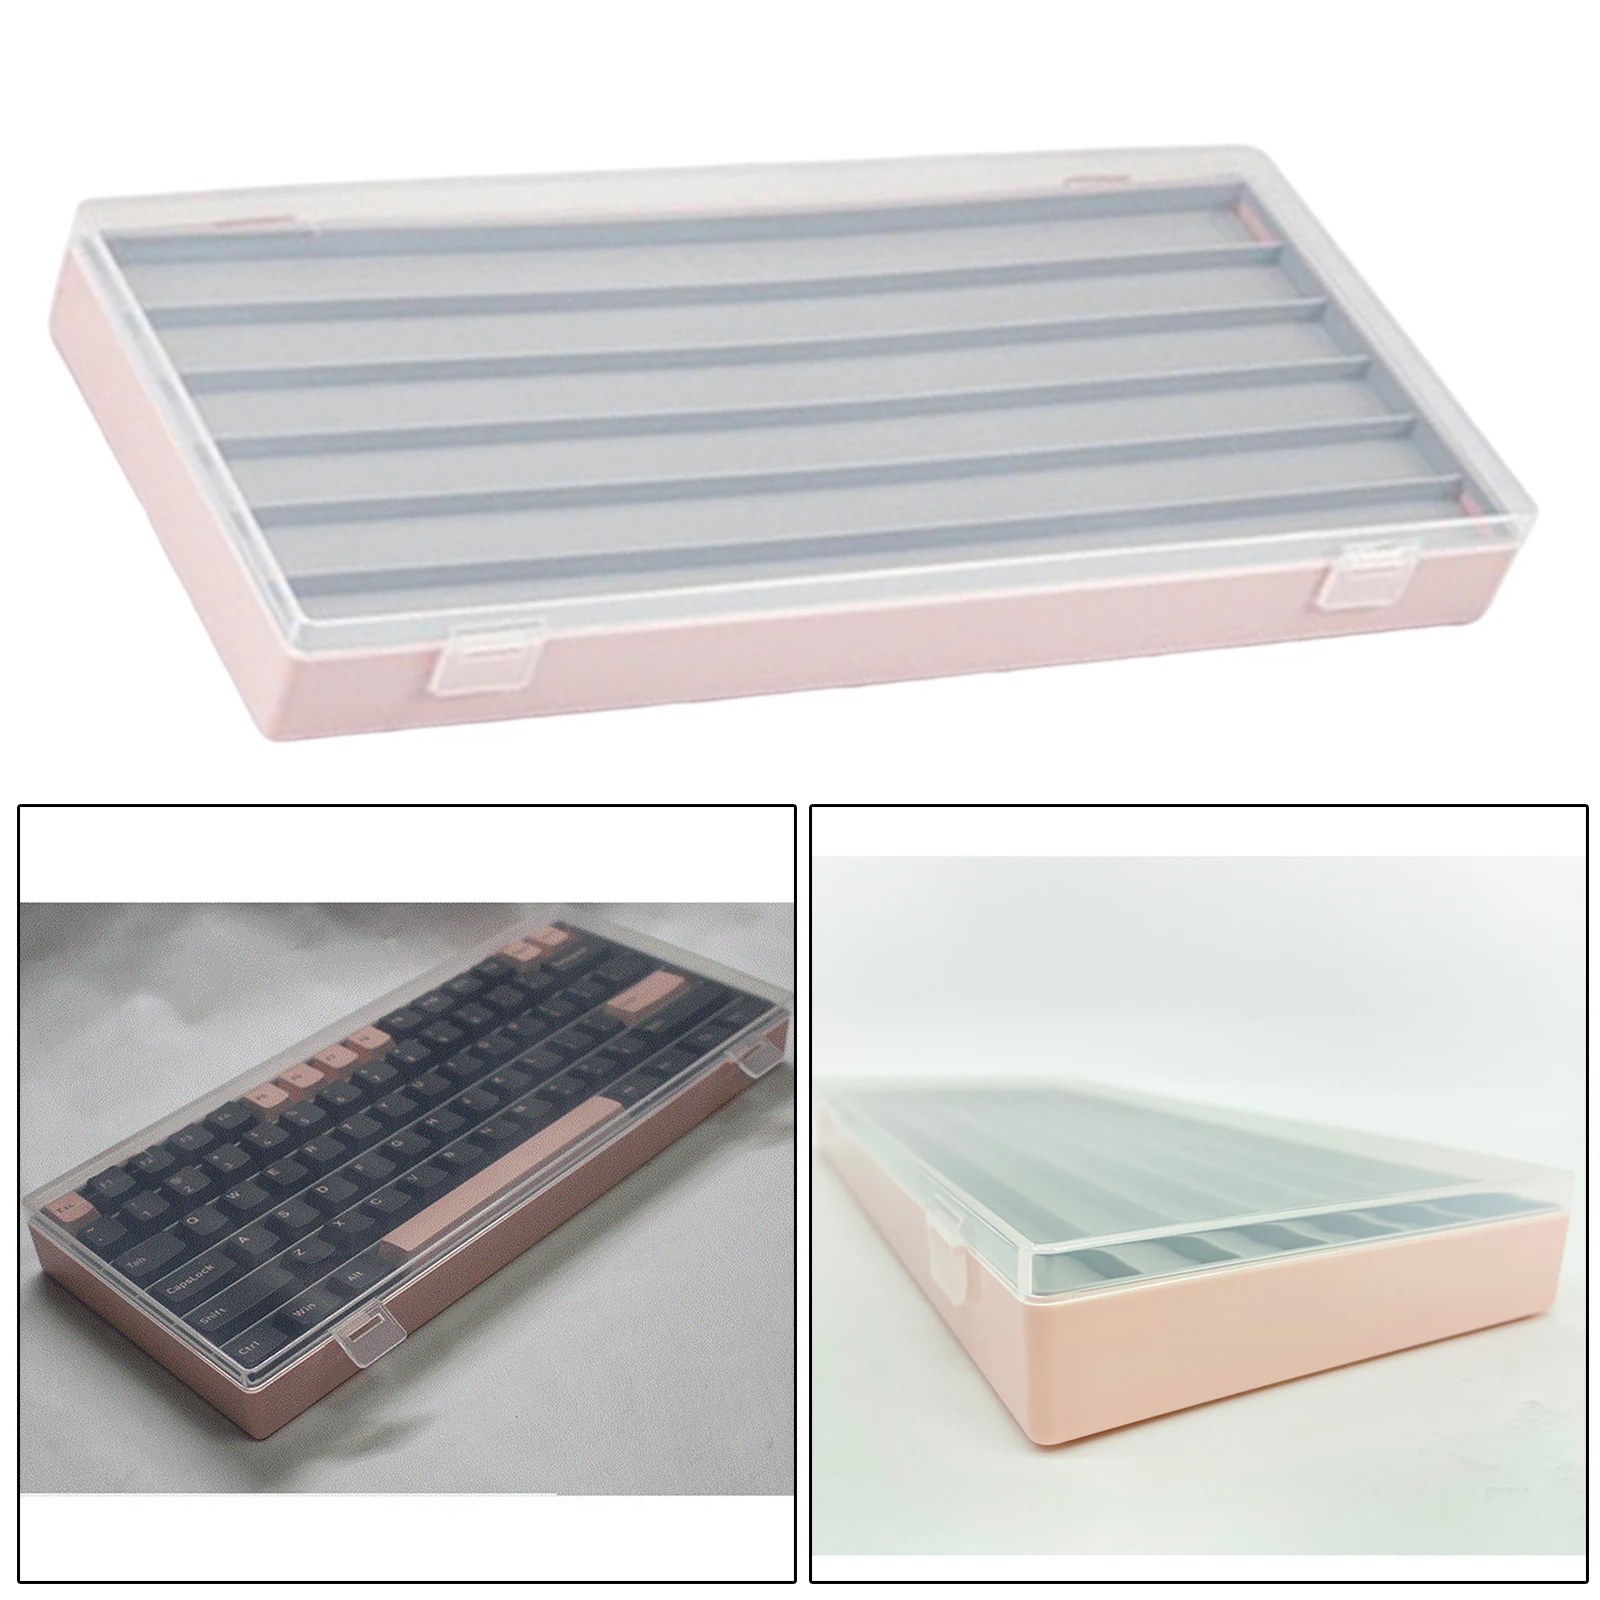 ABS Plastic Keycaps Storage Box w/Clear Lids Dustproof Storage Containers